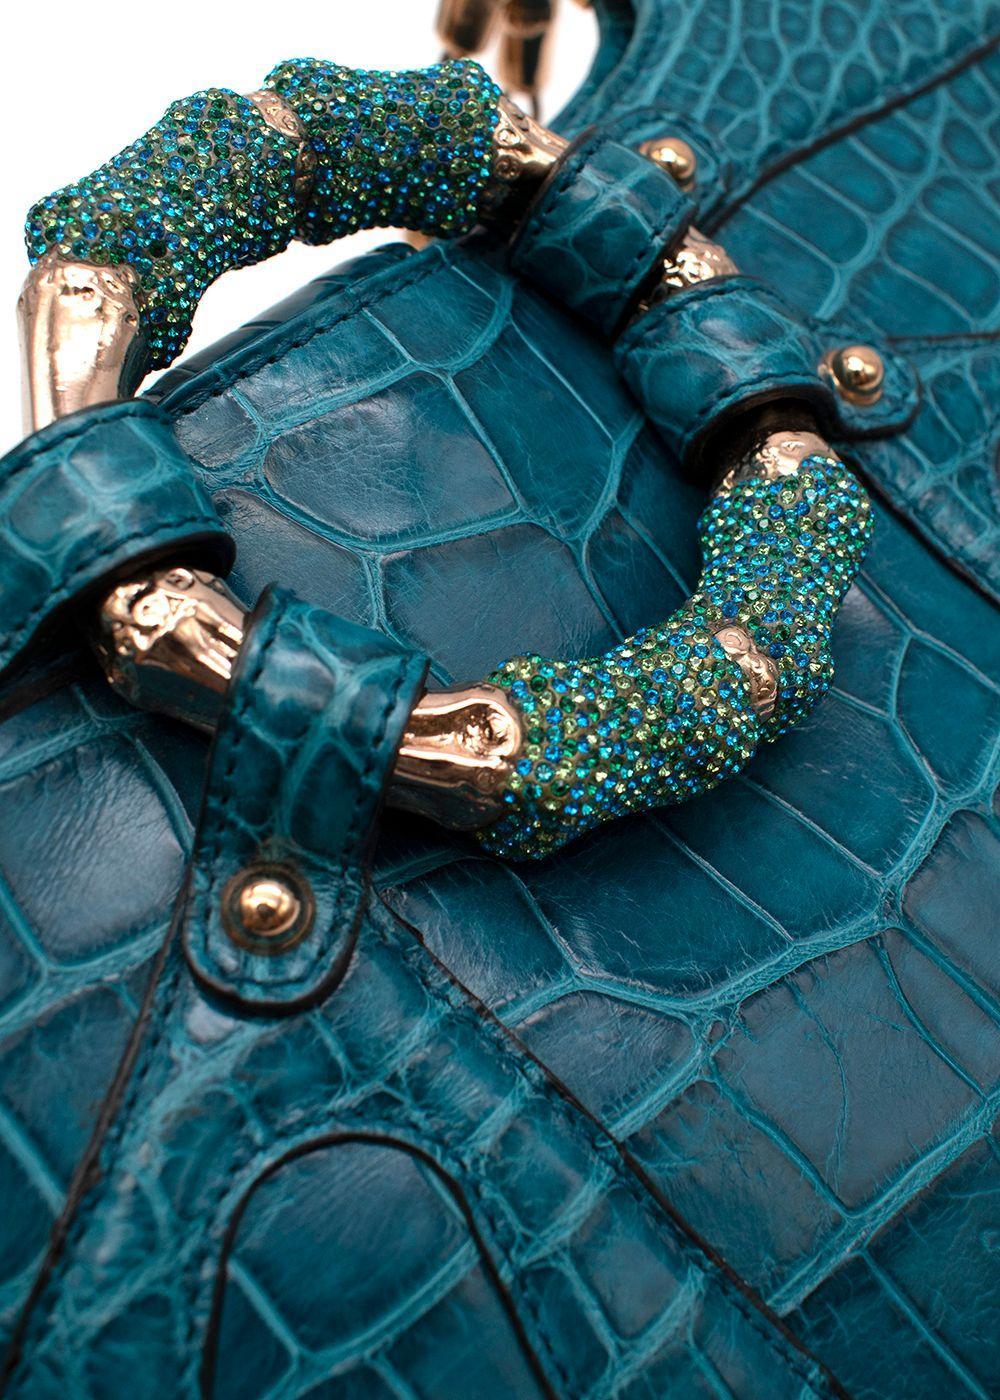 2004 Vintage Iconic Tom Ford for Gucci teal crocodile bag 3